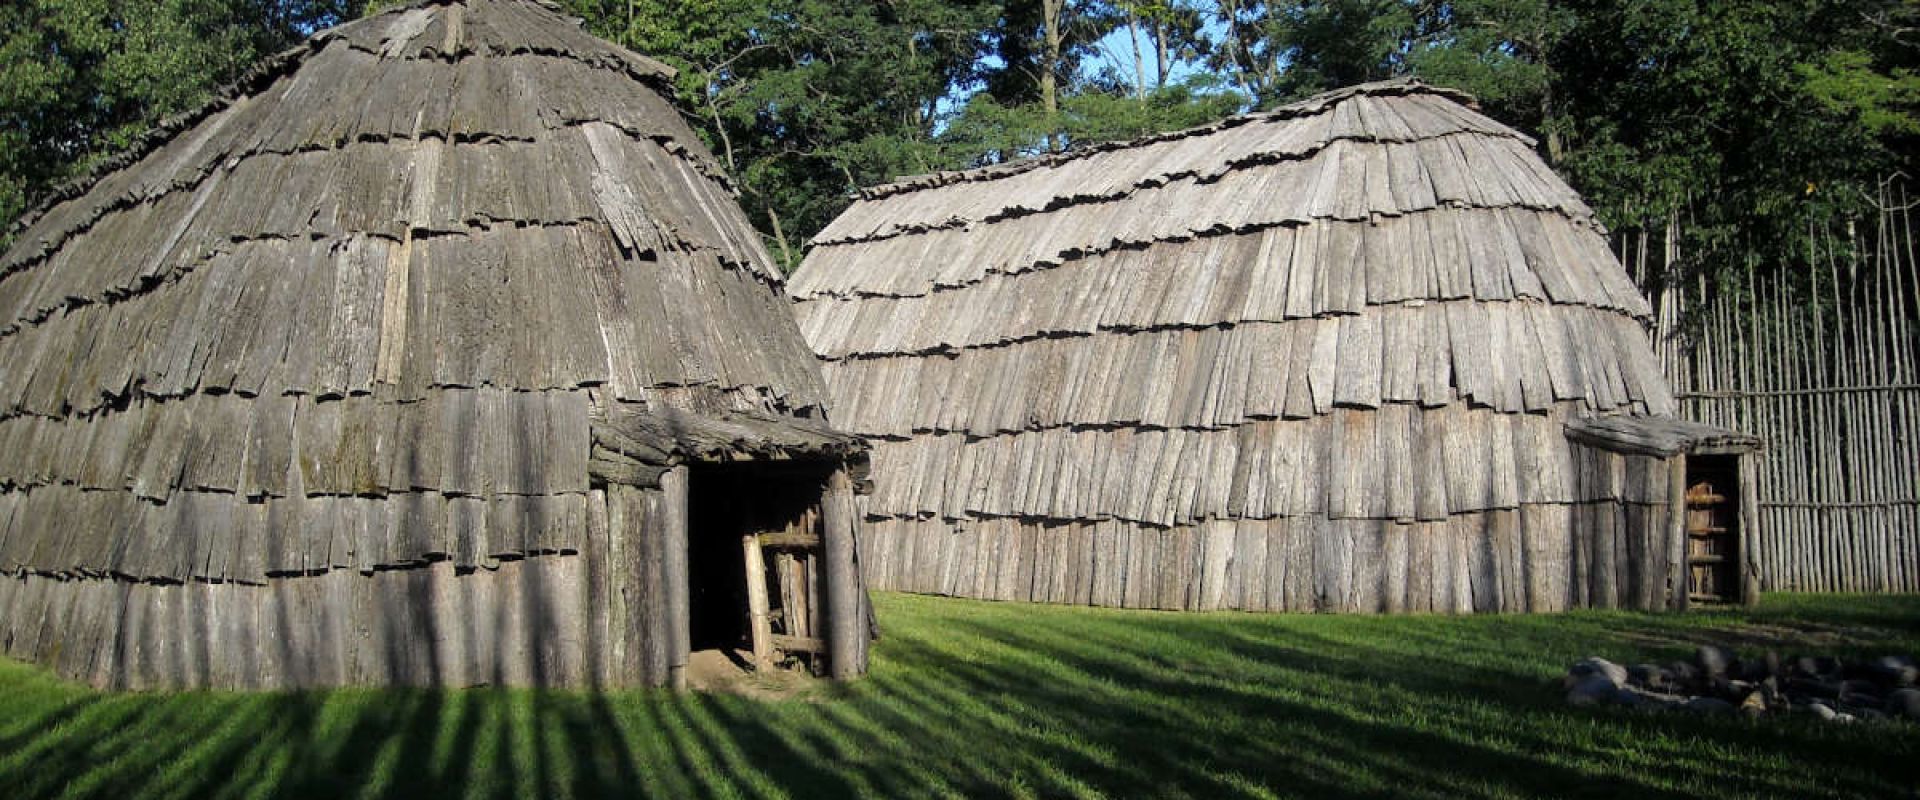 Two recreated longhouses at the Ska-Nah-Doht Village that reflect how First Nations people once lived.